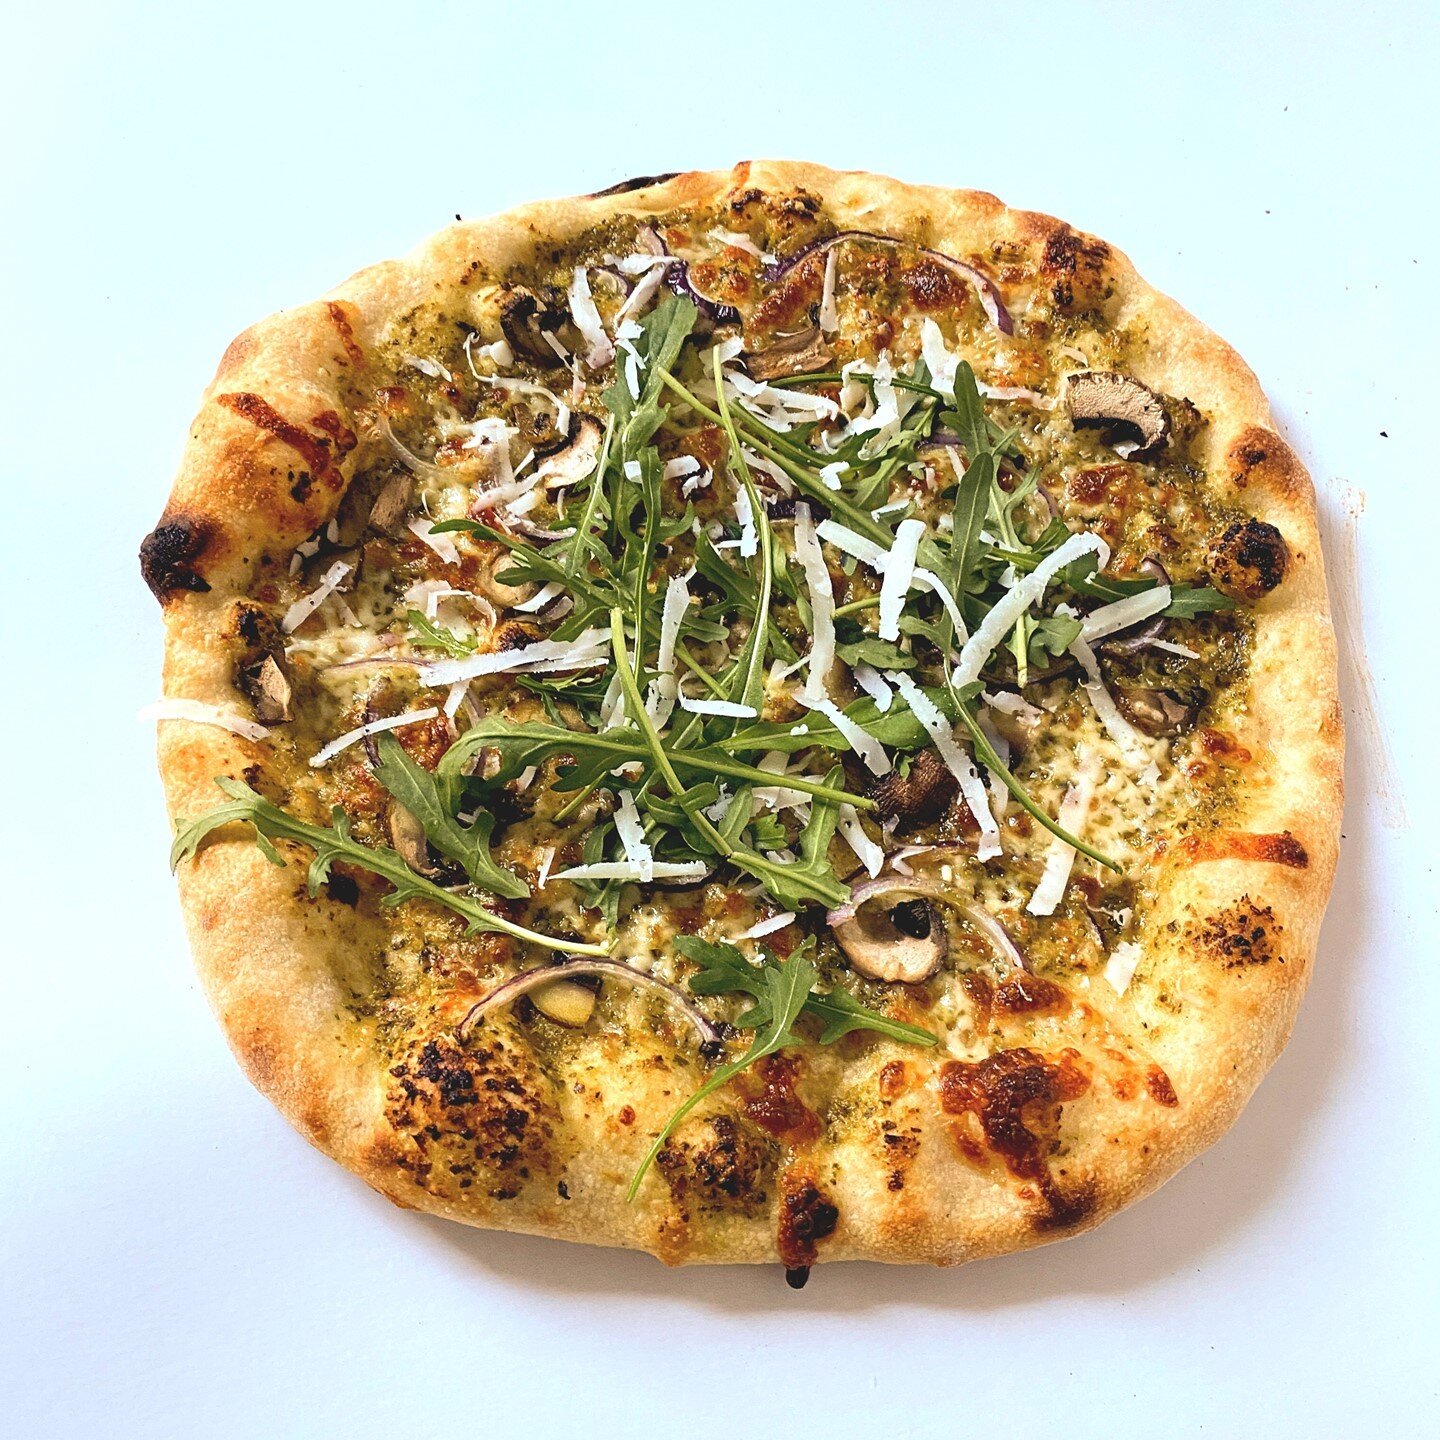 Our authentic sourdough pizzas are legendary in the Stroud area. Each is hand made to order using the finest organic and locally sourced ingredients.⁠
⁠
Call or text 07812 430620 to pre-order⁠
⁠
Open for collection from V&eacute;lo HQ, unit 17 Canal 